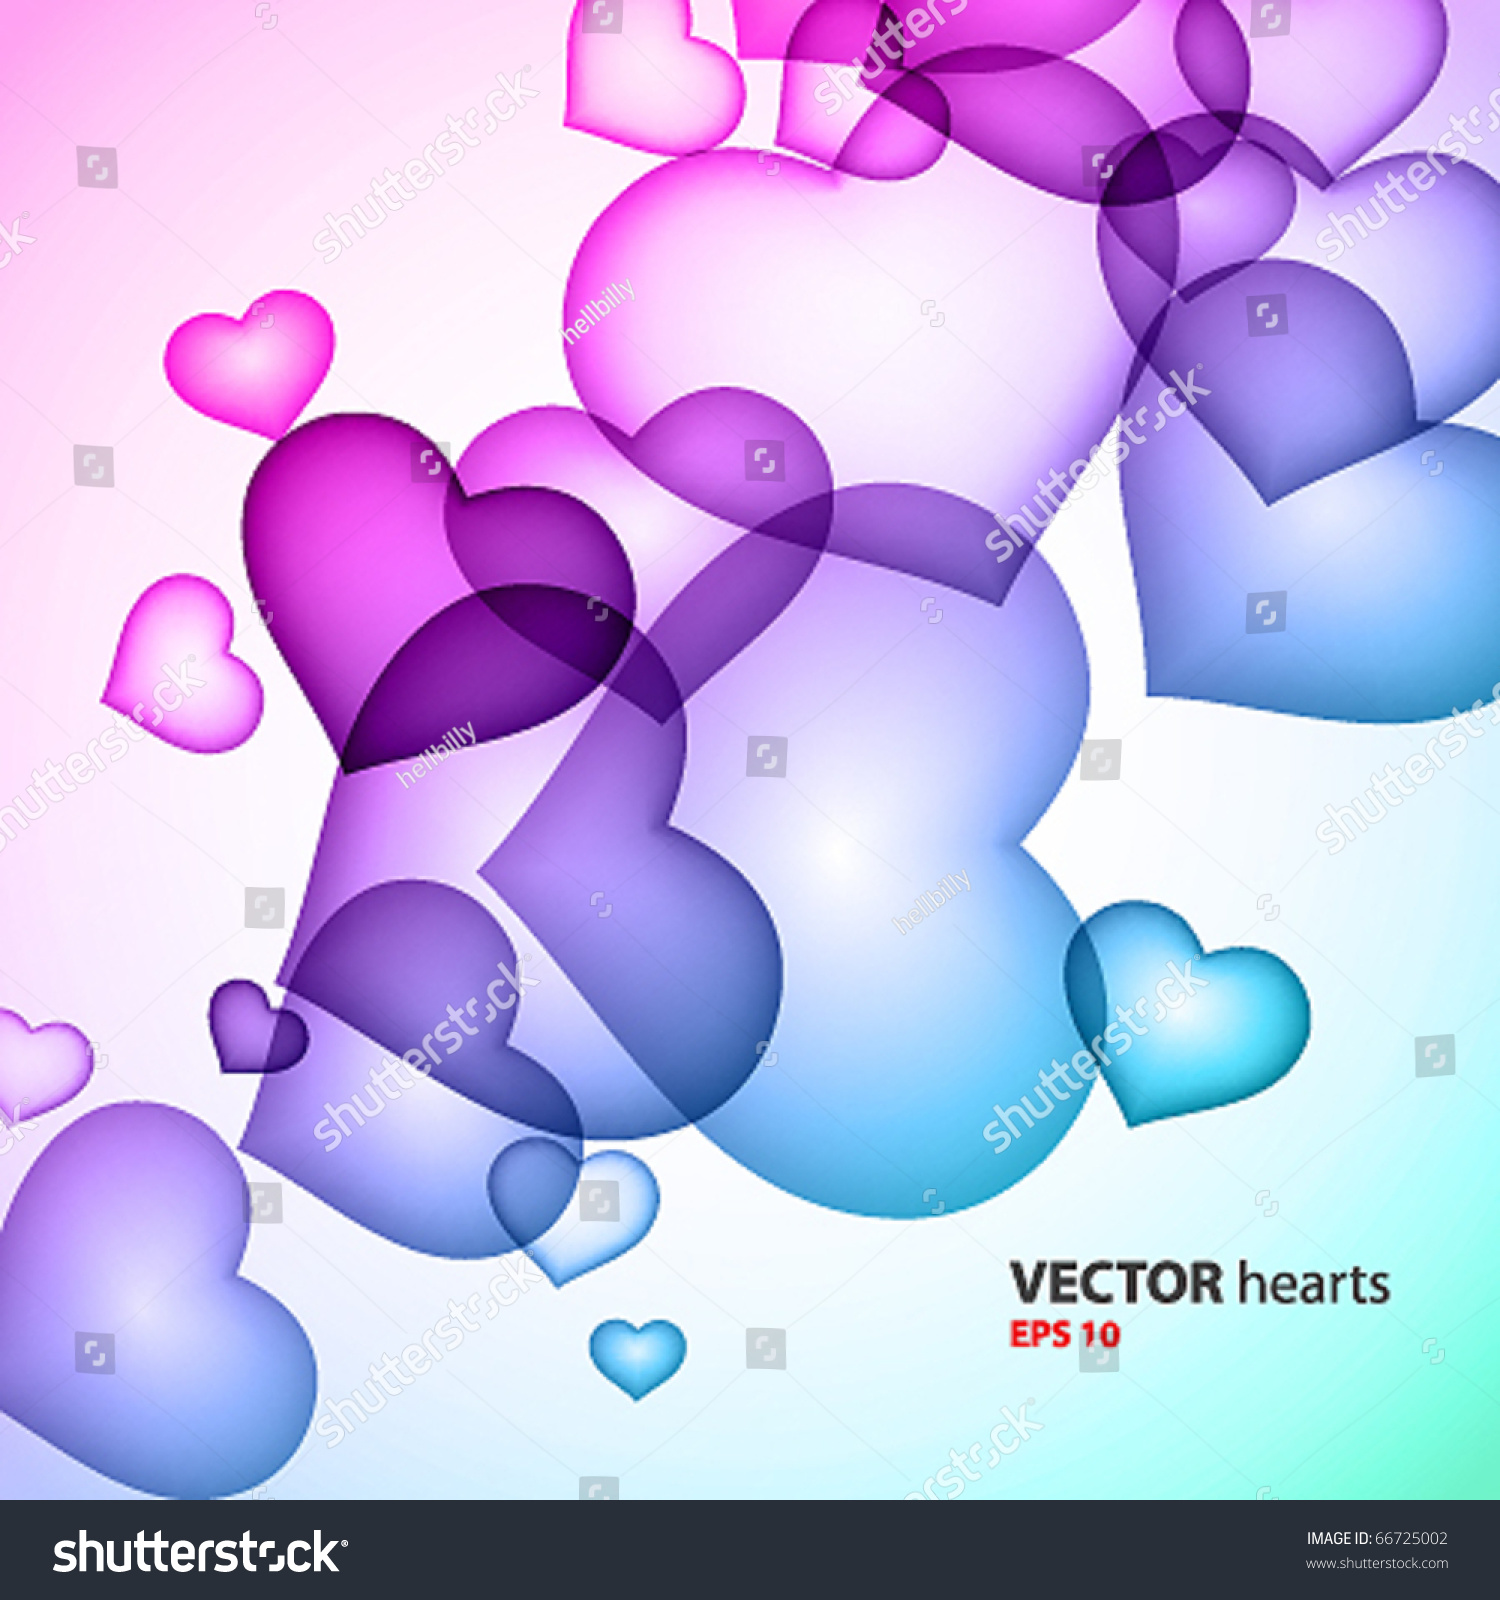 Abstract vector background. #66725002